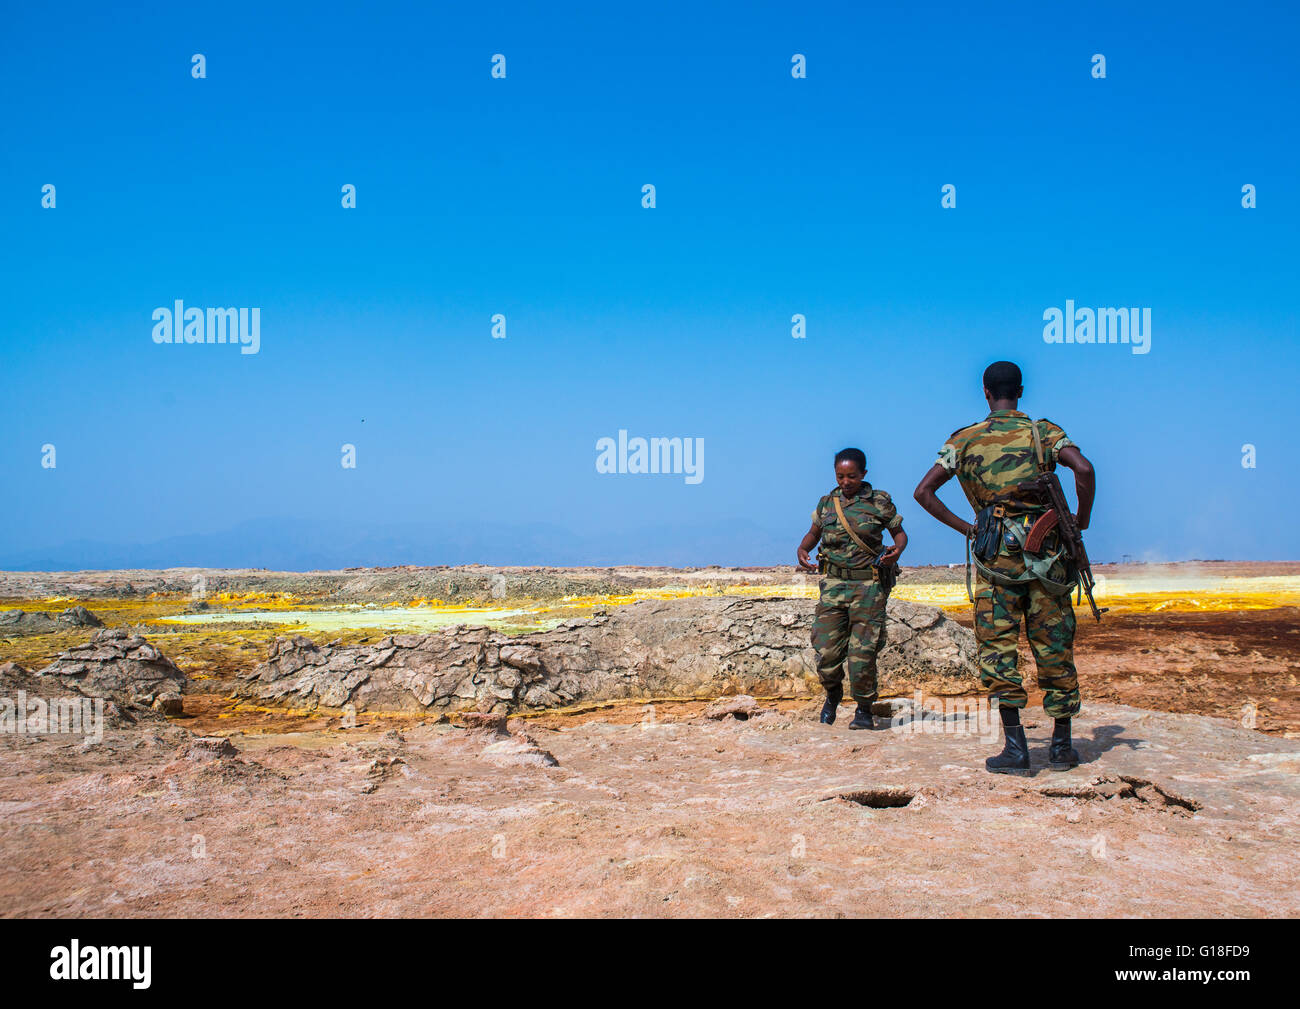 Ethiopian soldiers in front of colorful volcanic landscape in the danakil depression, Afar region, Dallol, Ethiopia Stock Photo